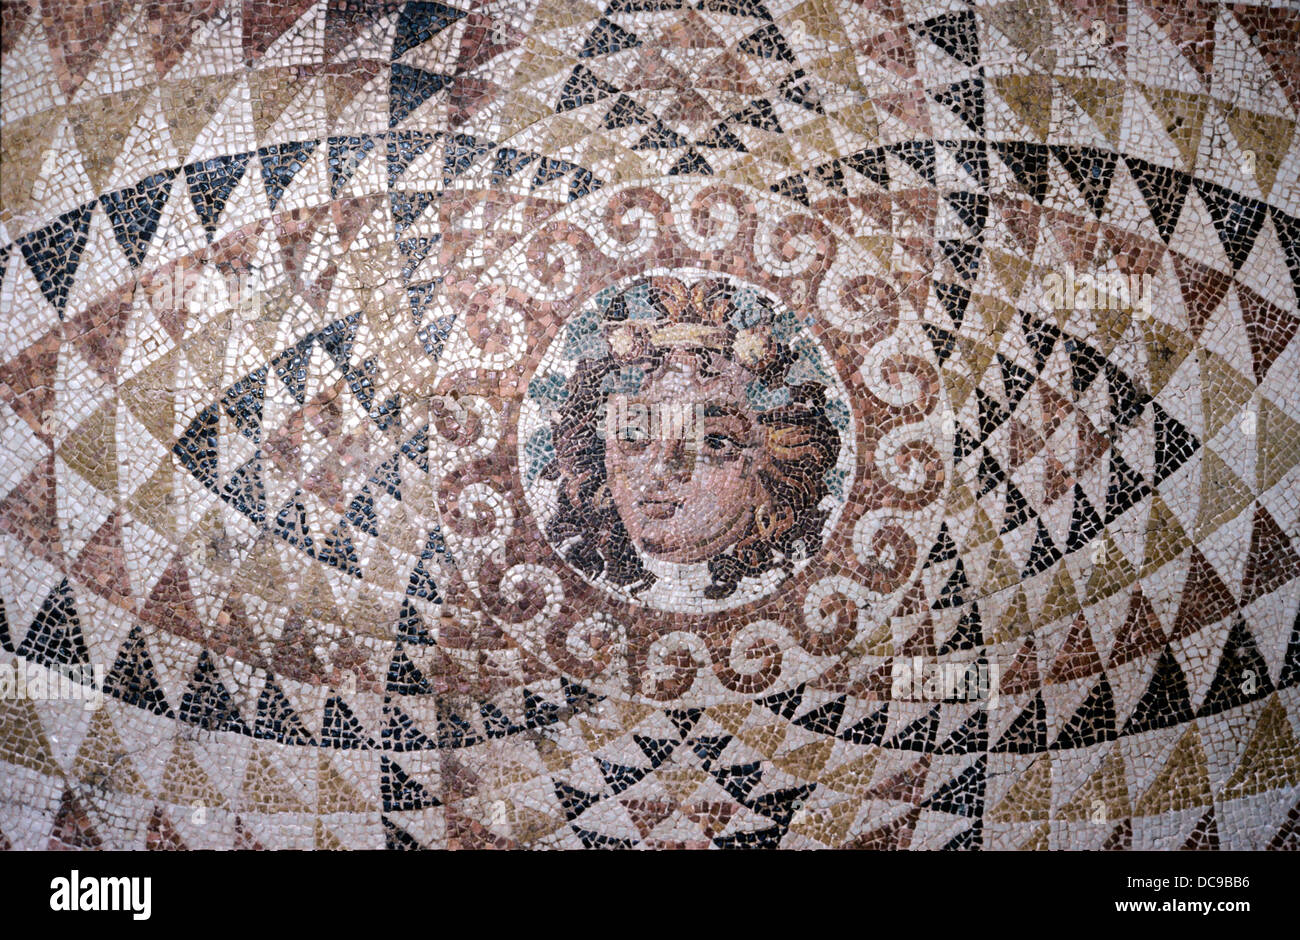 Mosaic floor showing head of Dionysus set in a pattern of triangles. From Roman villa. Corinth. Circa 2nd cent . AD/CE.  Corinth, Archaeological Museum of Ancient Corinth, Greece Stock Photo